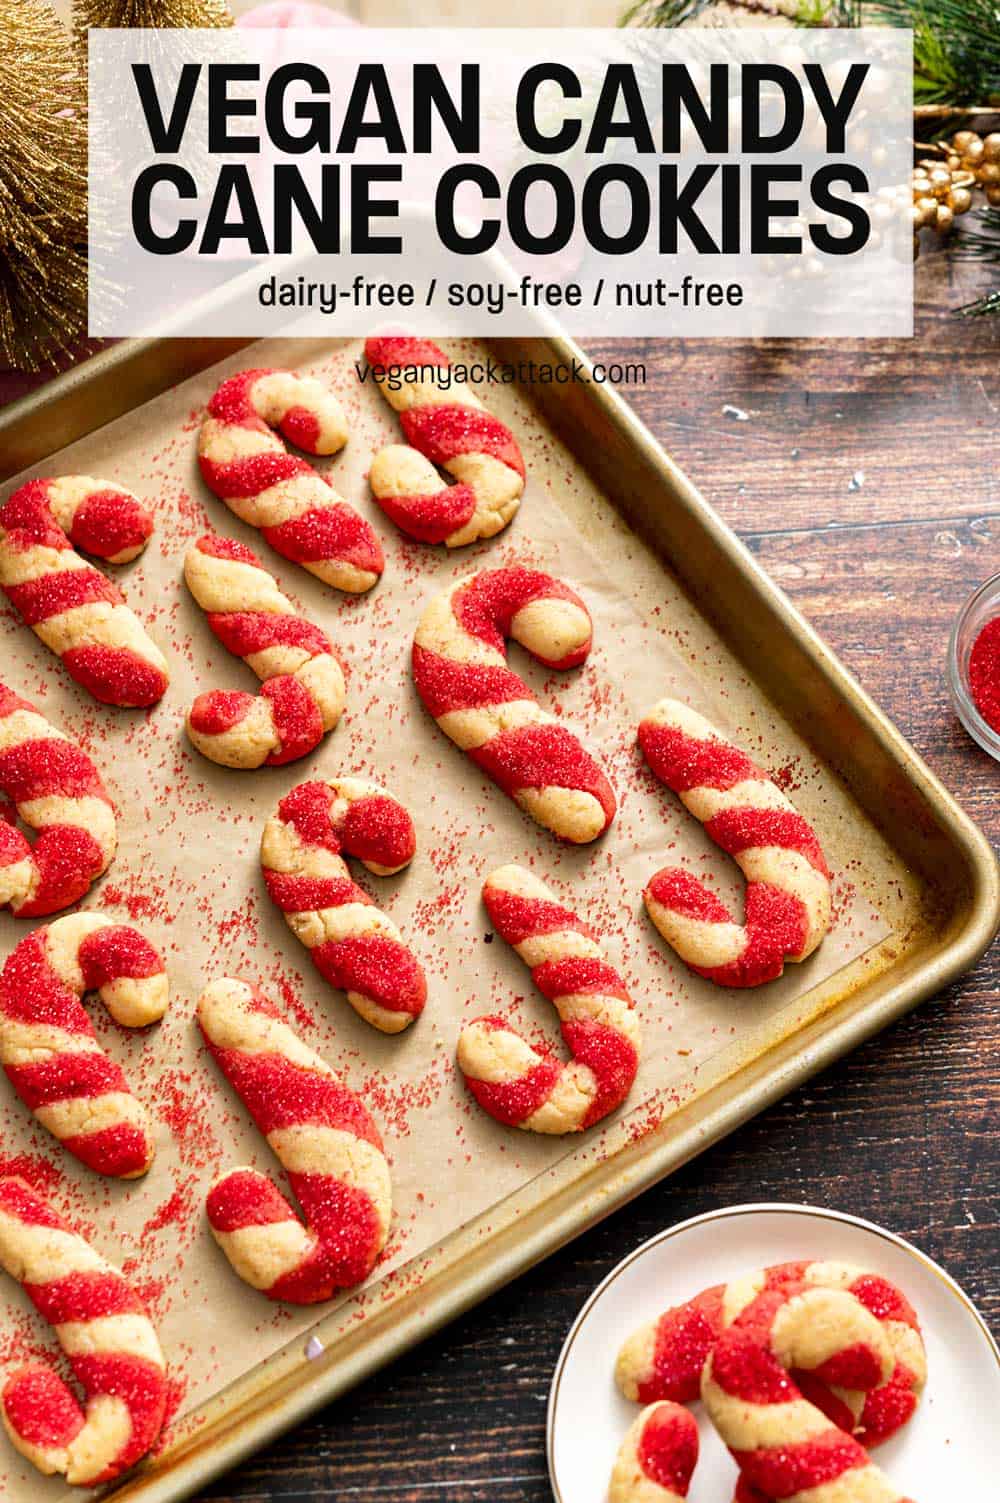 Candy cane-shaped cookies on a baking sheet next to colored sugar with text overlay "Vegan Candy Cane Cookies"